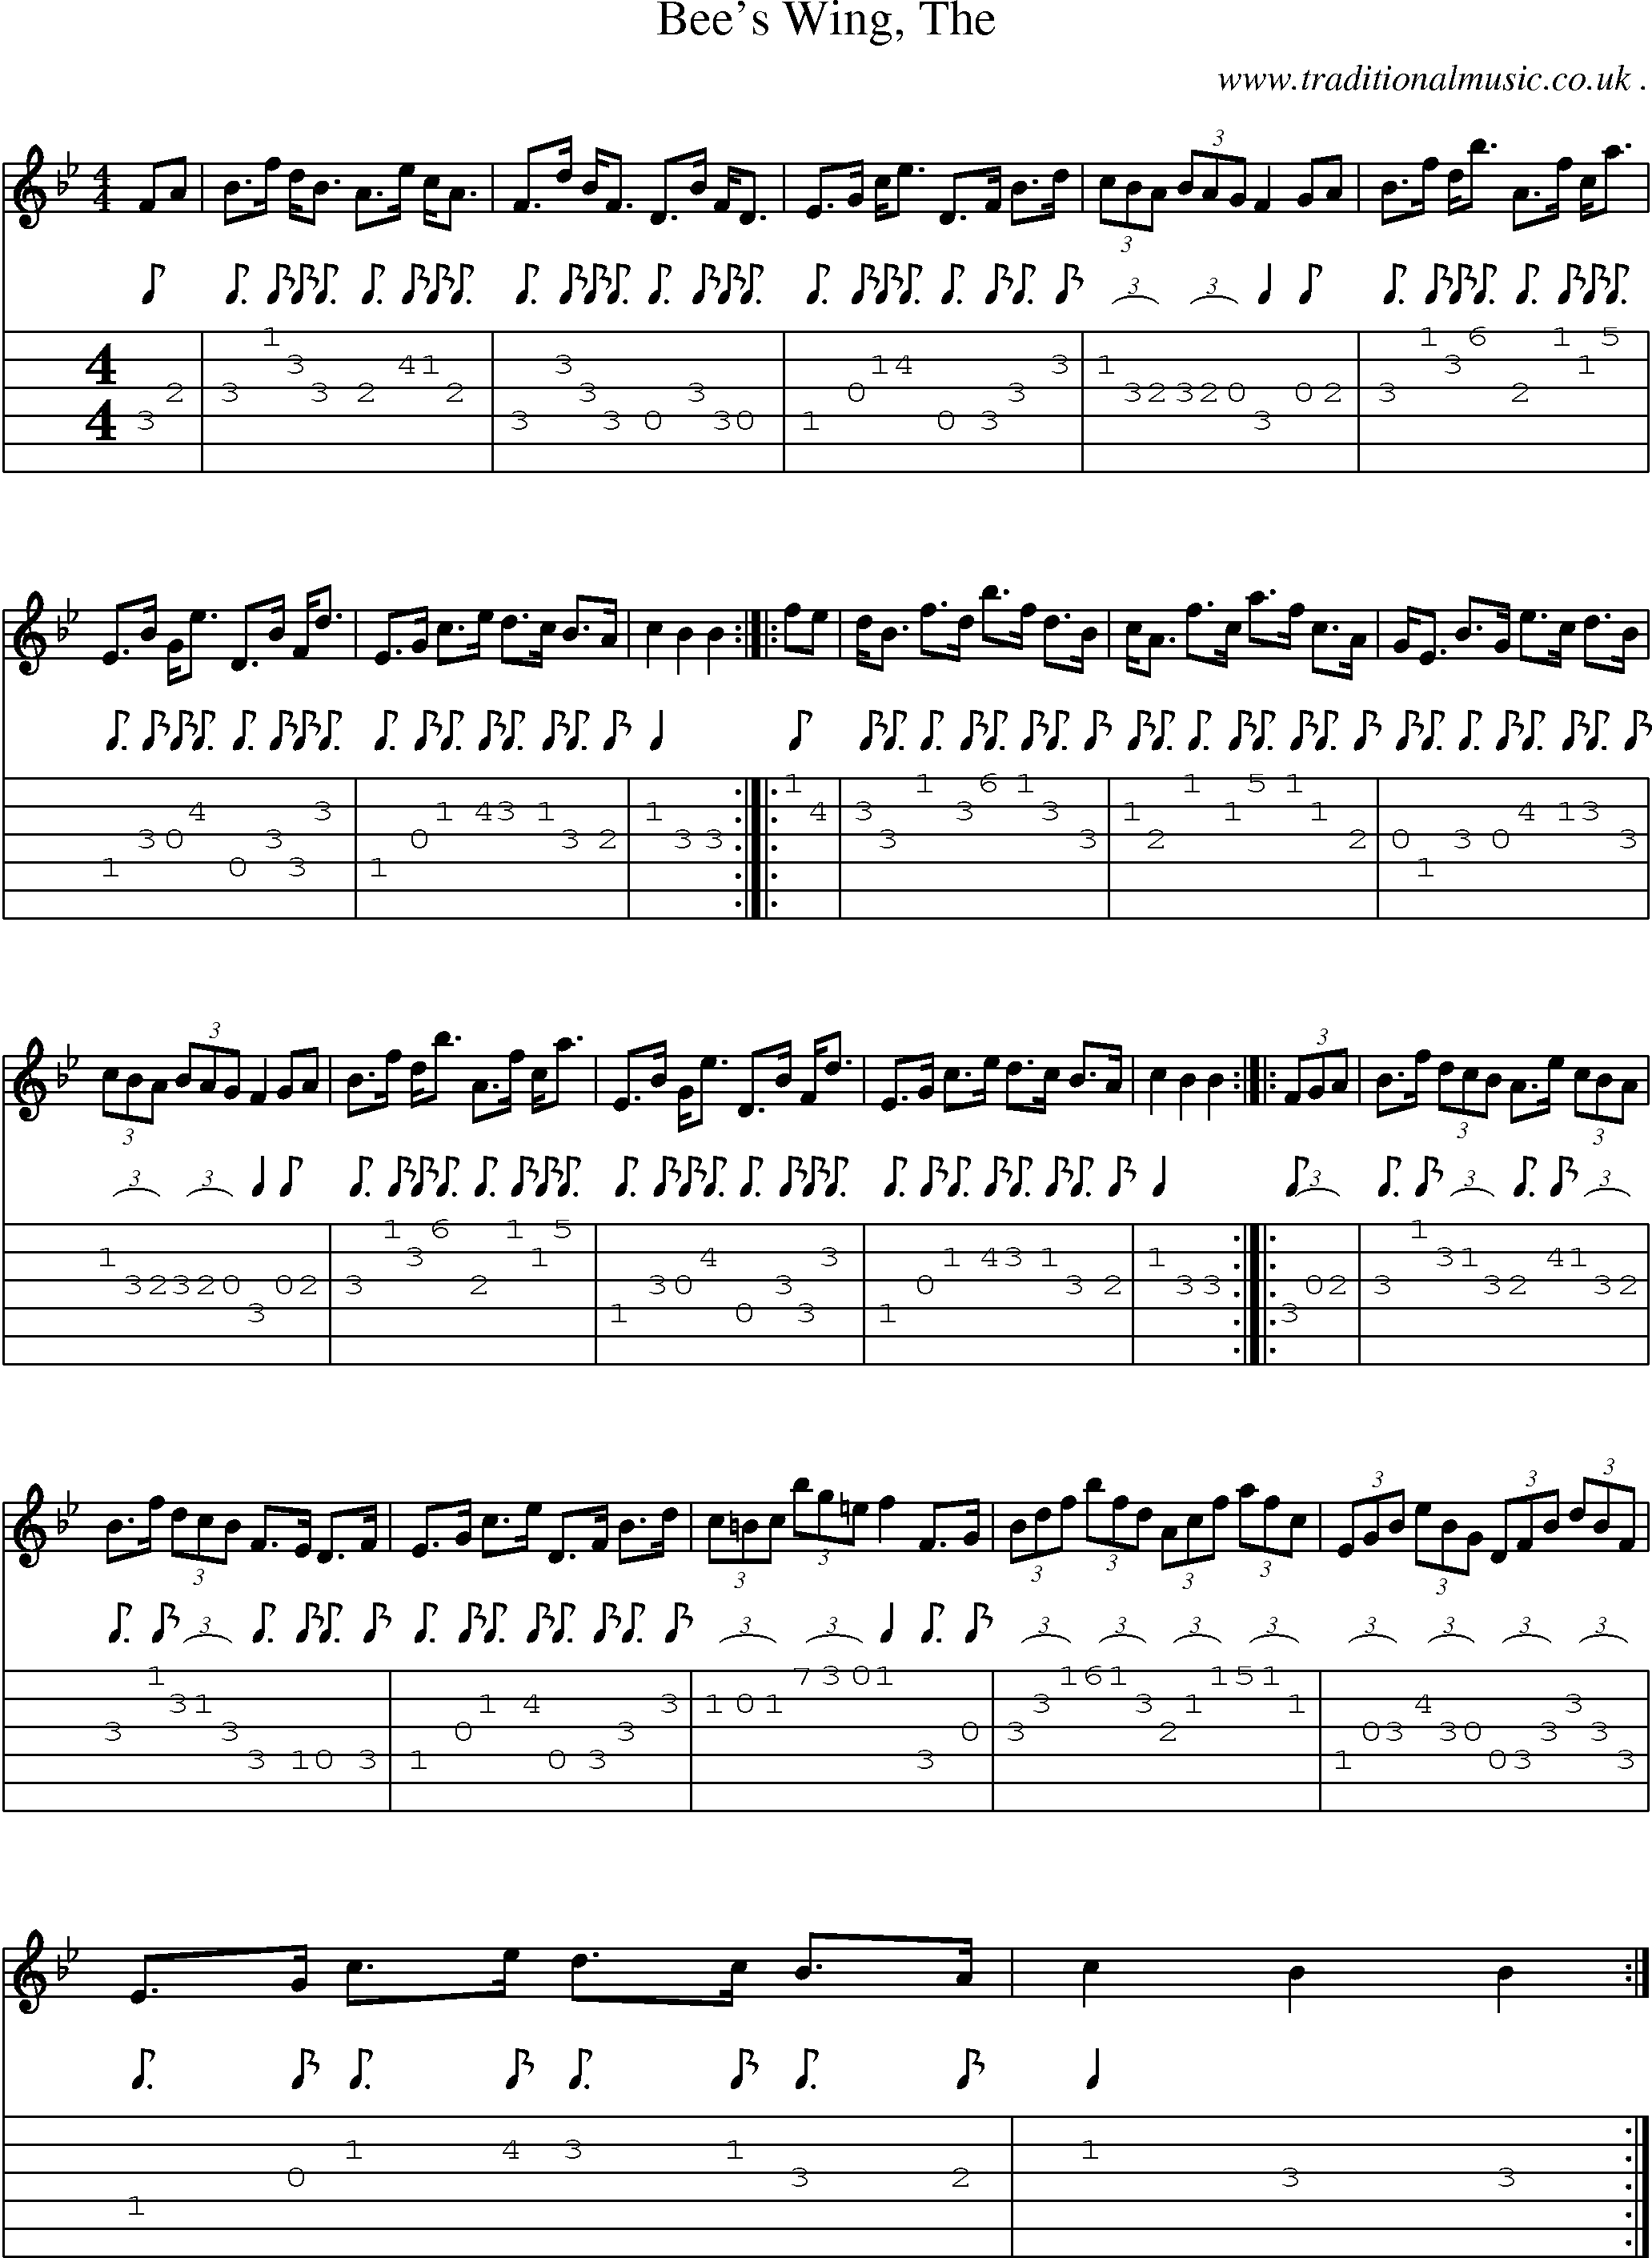 Sheet-music  score, Chords and Guitar Tabs for Bees Wing The